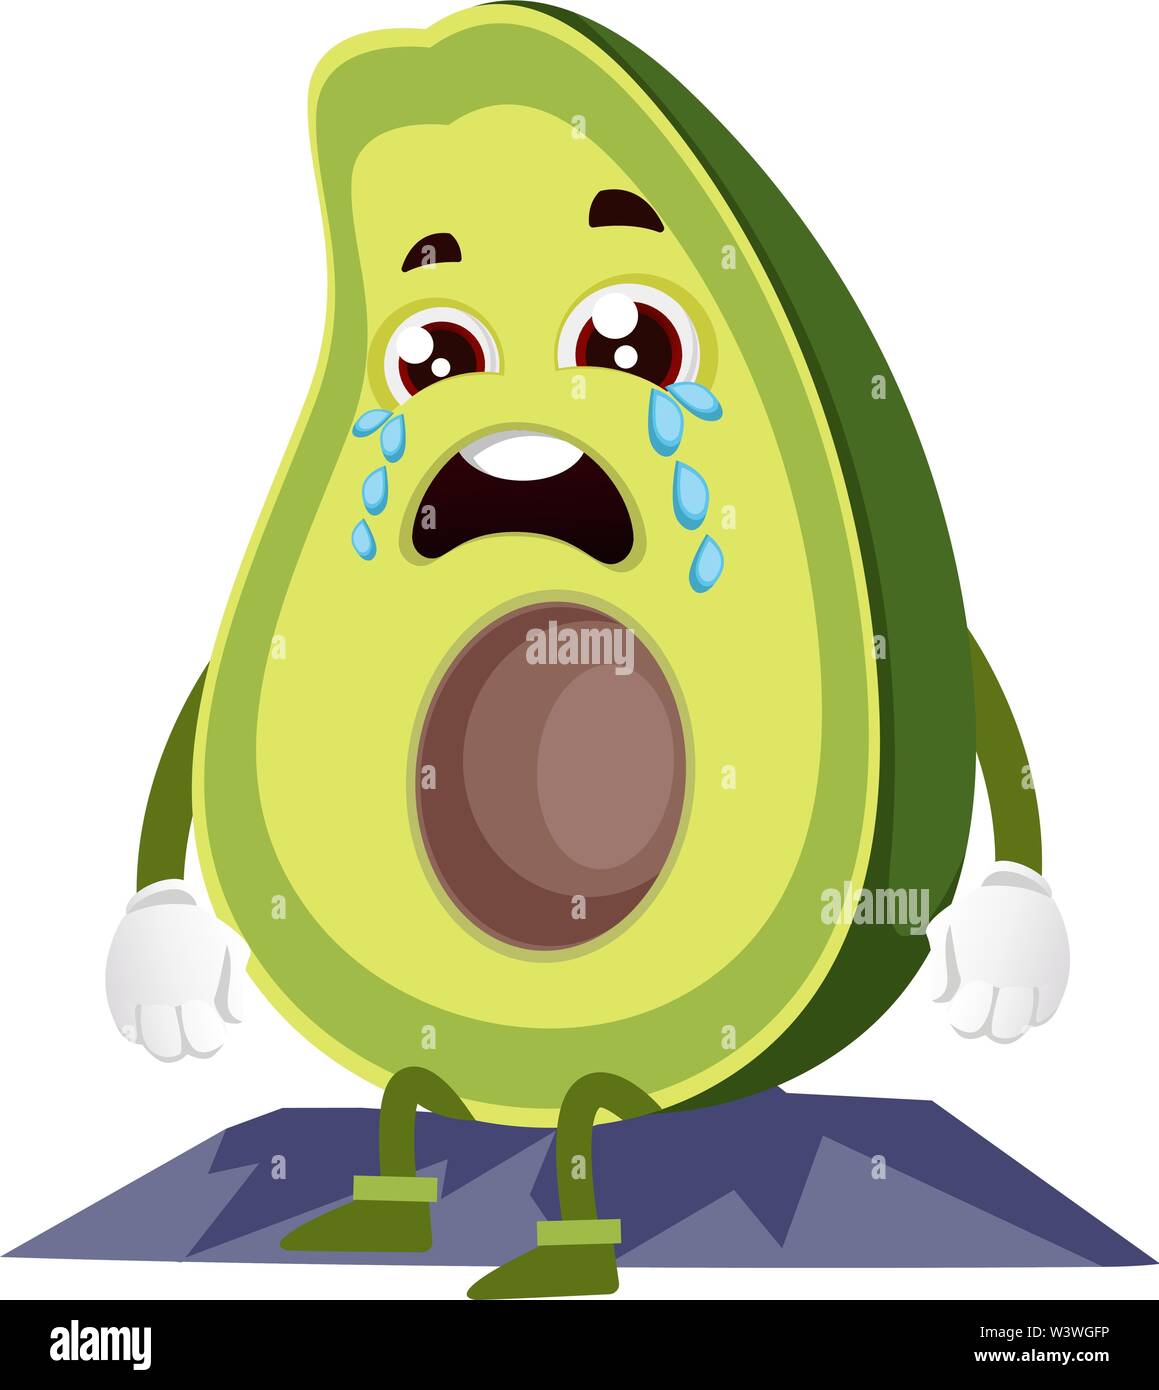 Crying avocado, illustration, vector on white background. Stock Vector